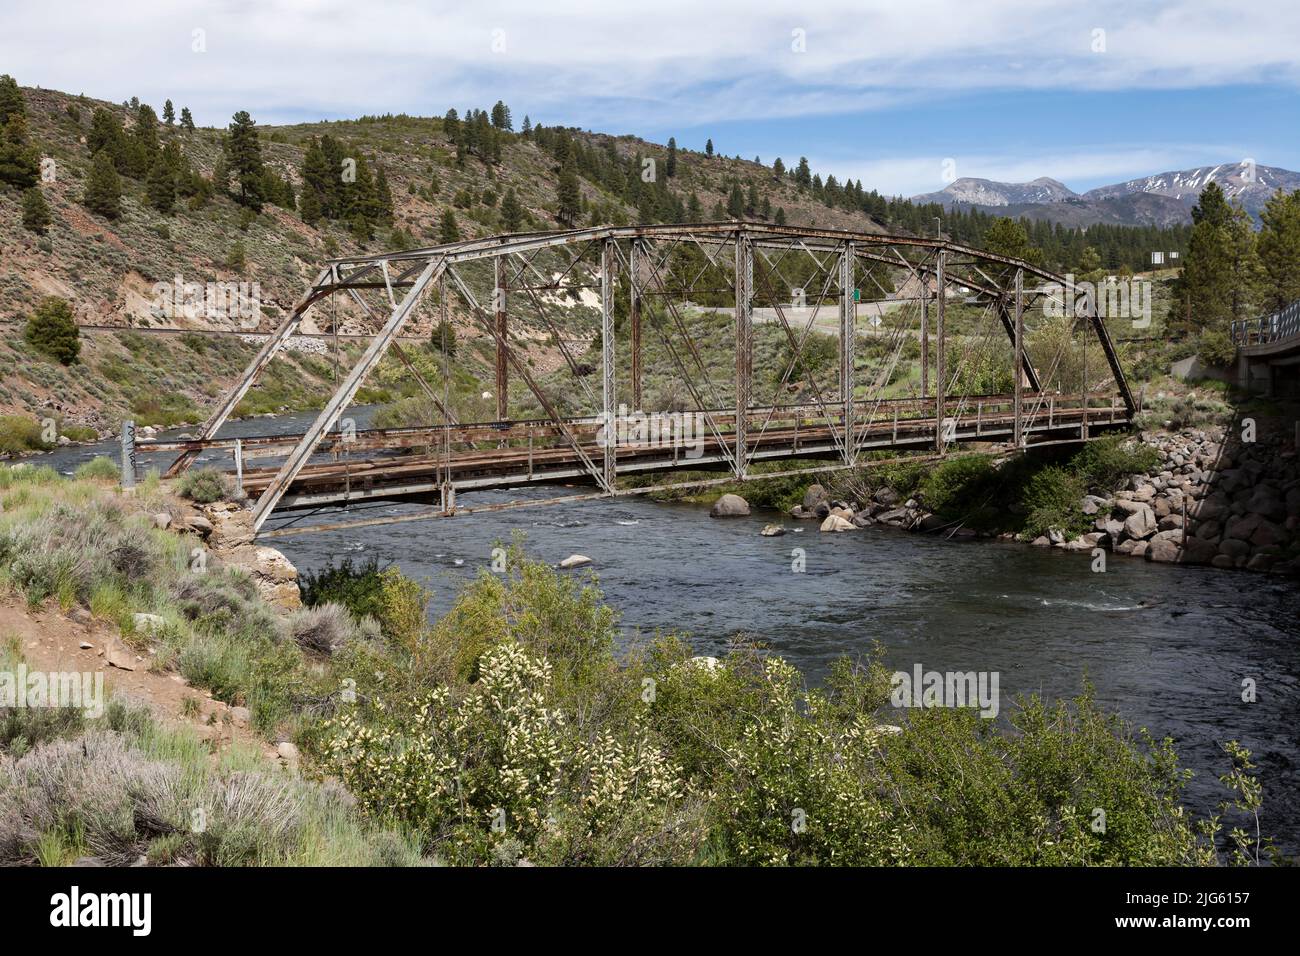 The Parker pin-connected through truss bridge with a wooden deck crosses the Truckee River at Boca, California. Stock Photo